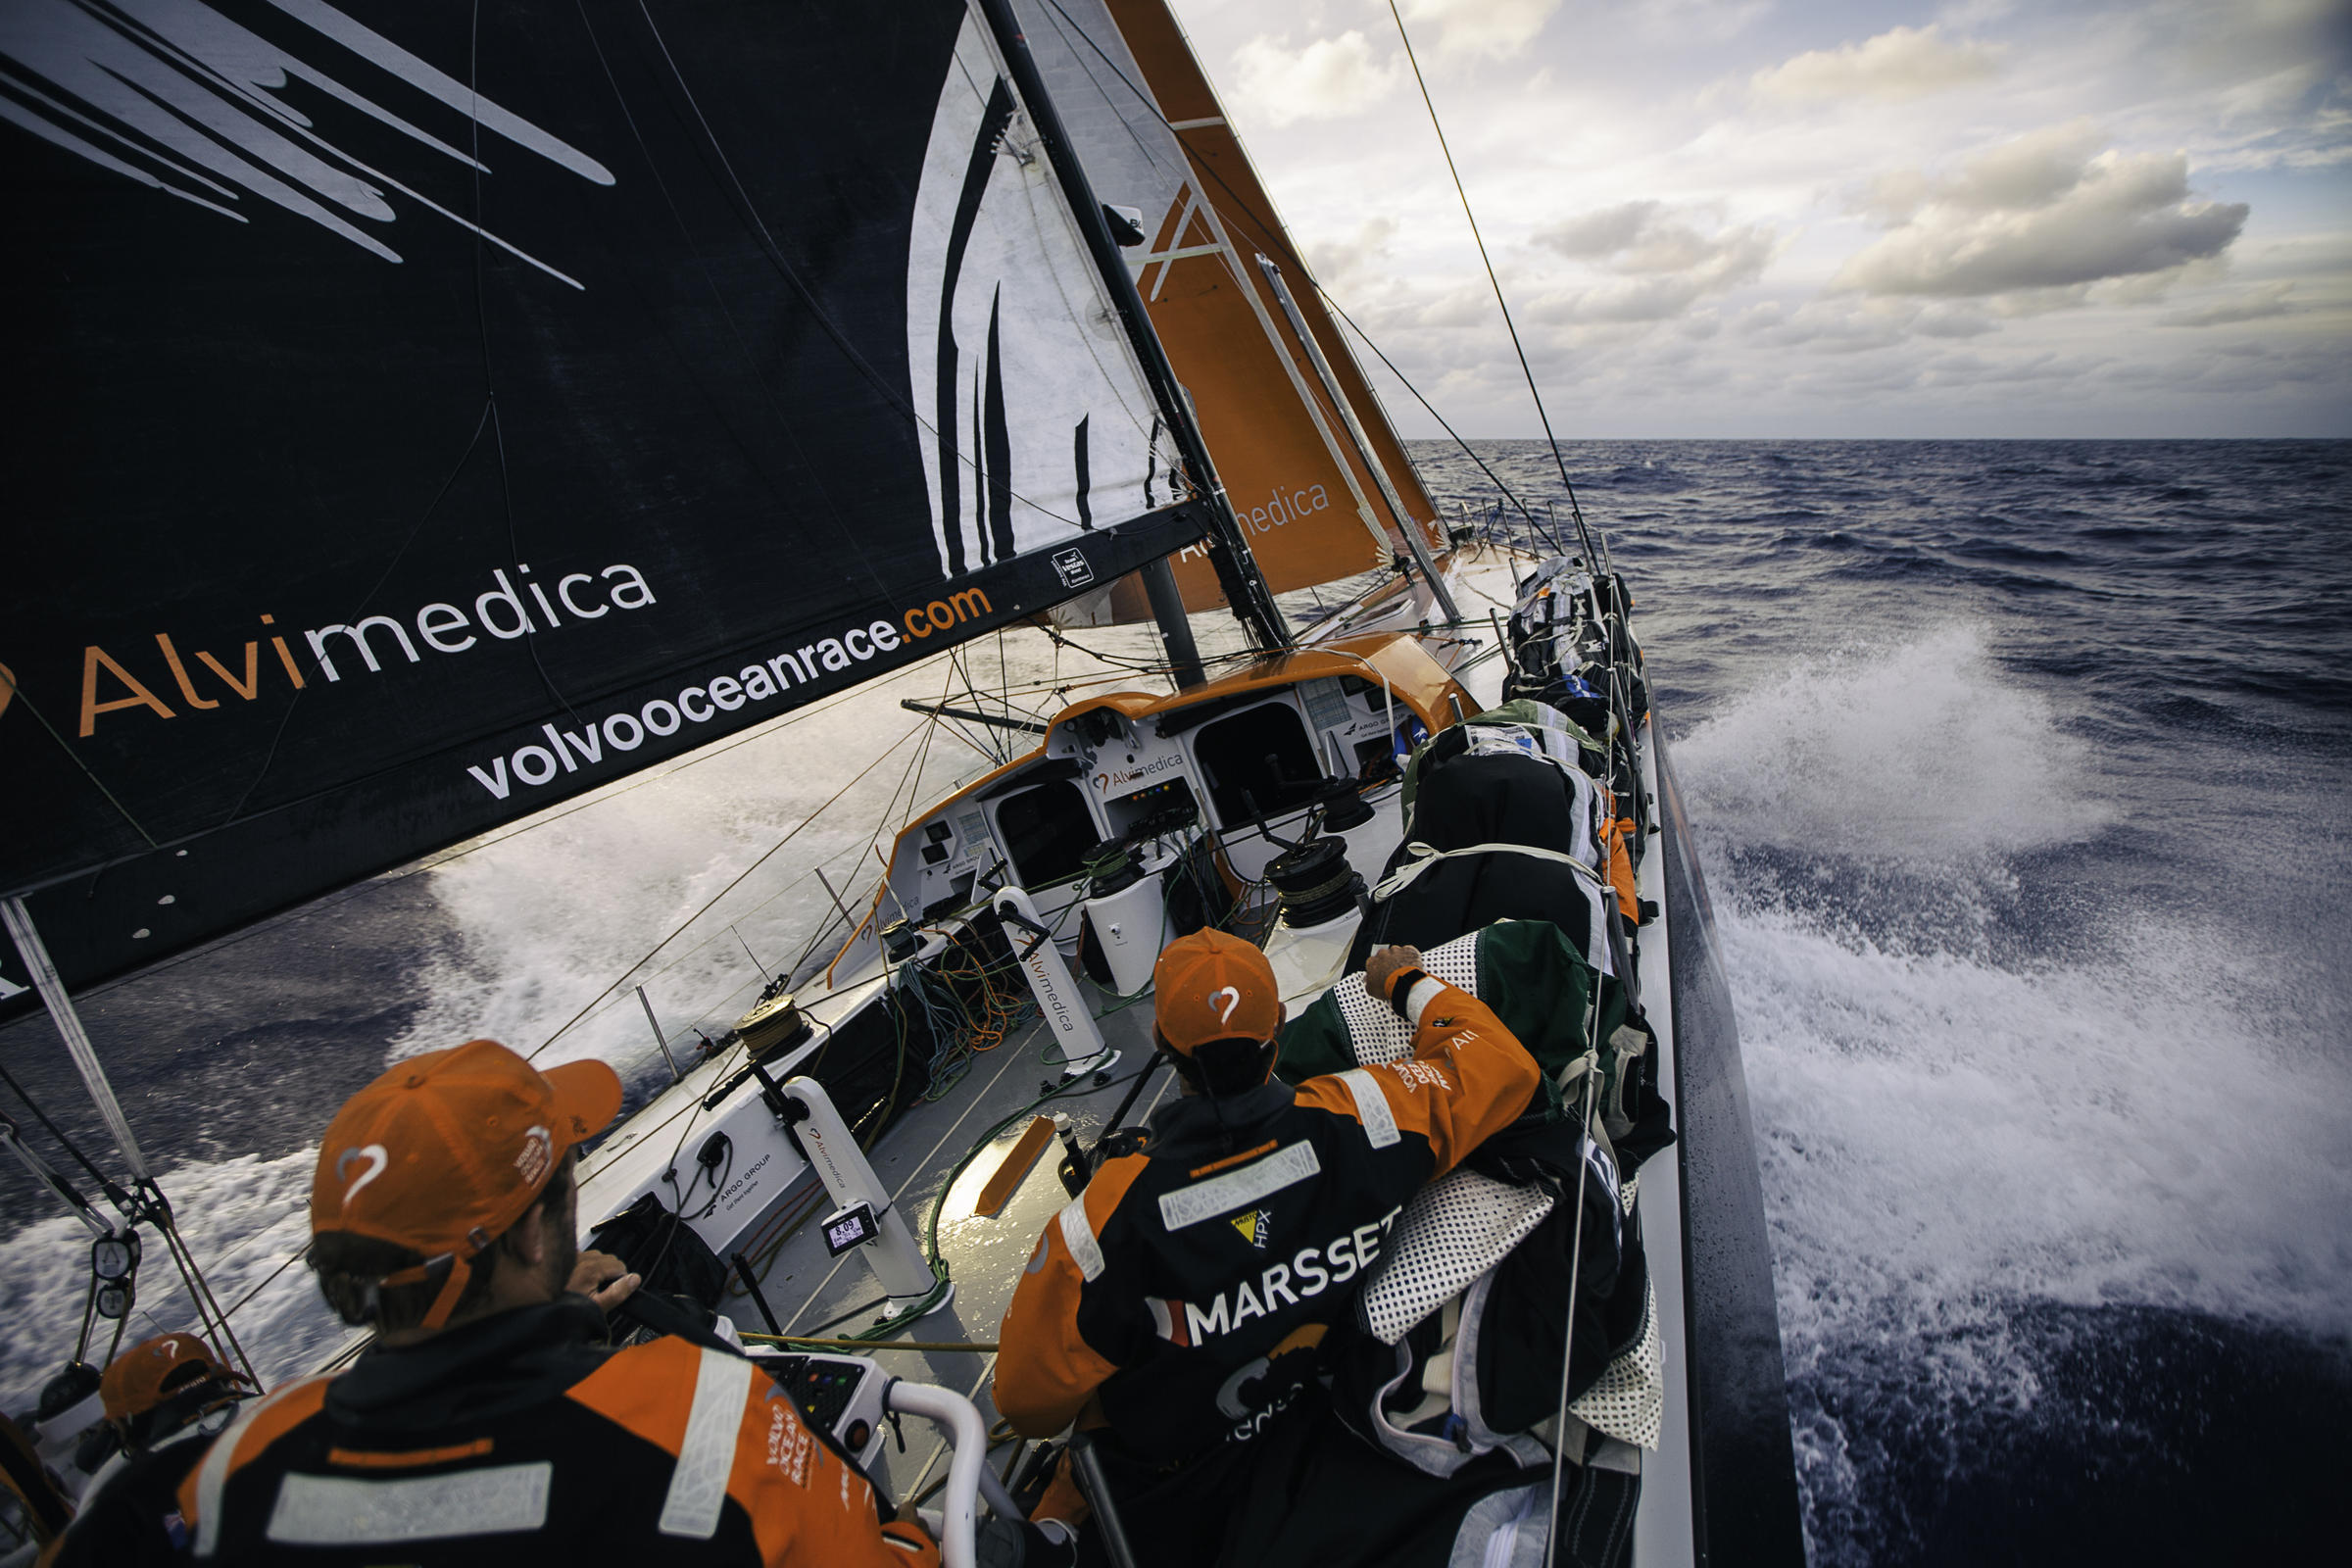 Photo Essay: Sailing with Team Alvimedica of the Volvo Ocean Race